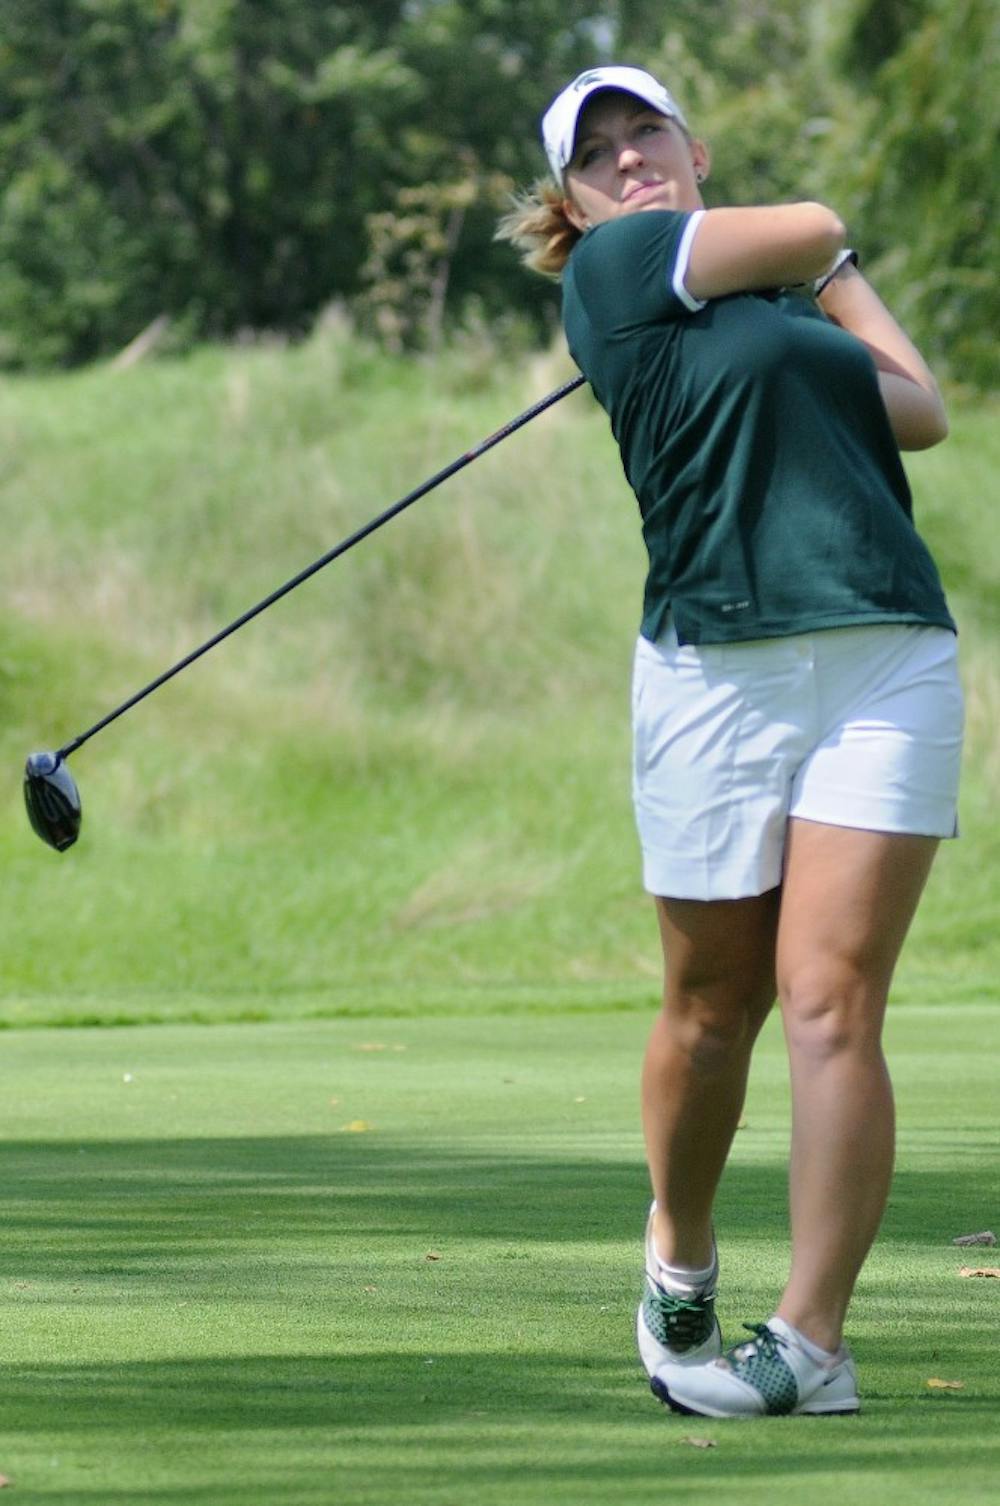 Junior Caroline Powers looks at the direction of the ball after hitting the ball at Forest Akers West Golf Course on Sept. 18 2011. Powers ranked first at the Fossum Invitational among 66 players from 12 colleges. State News File Photo